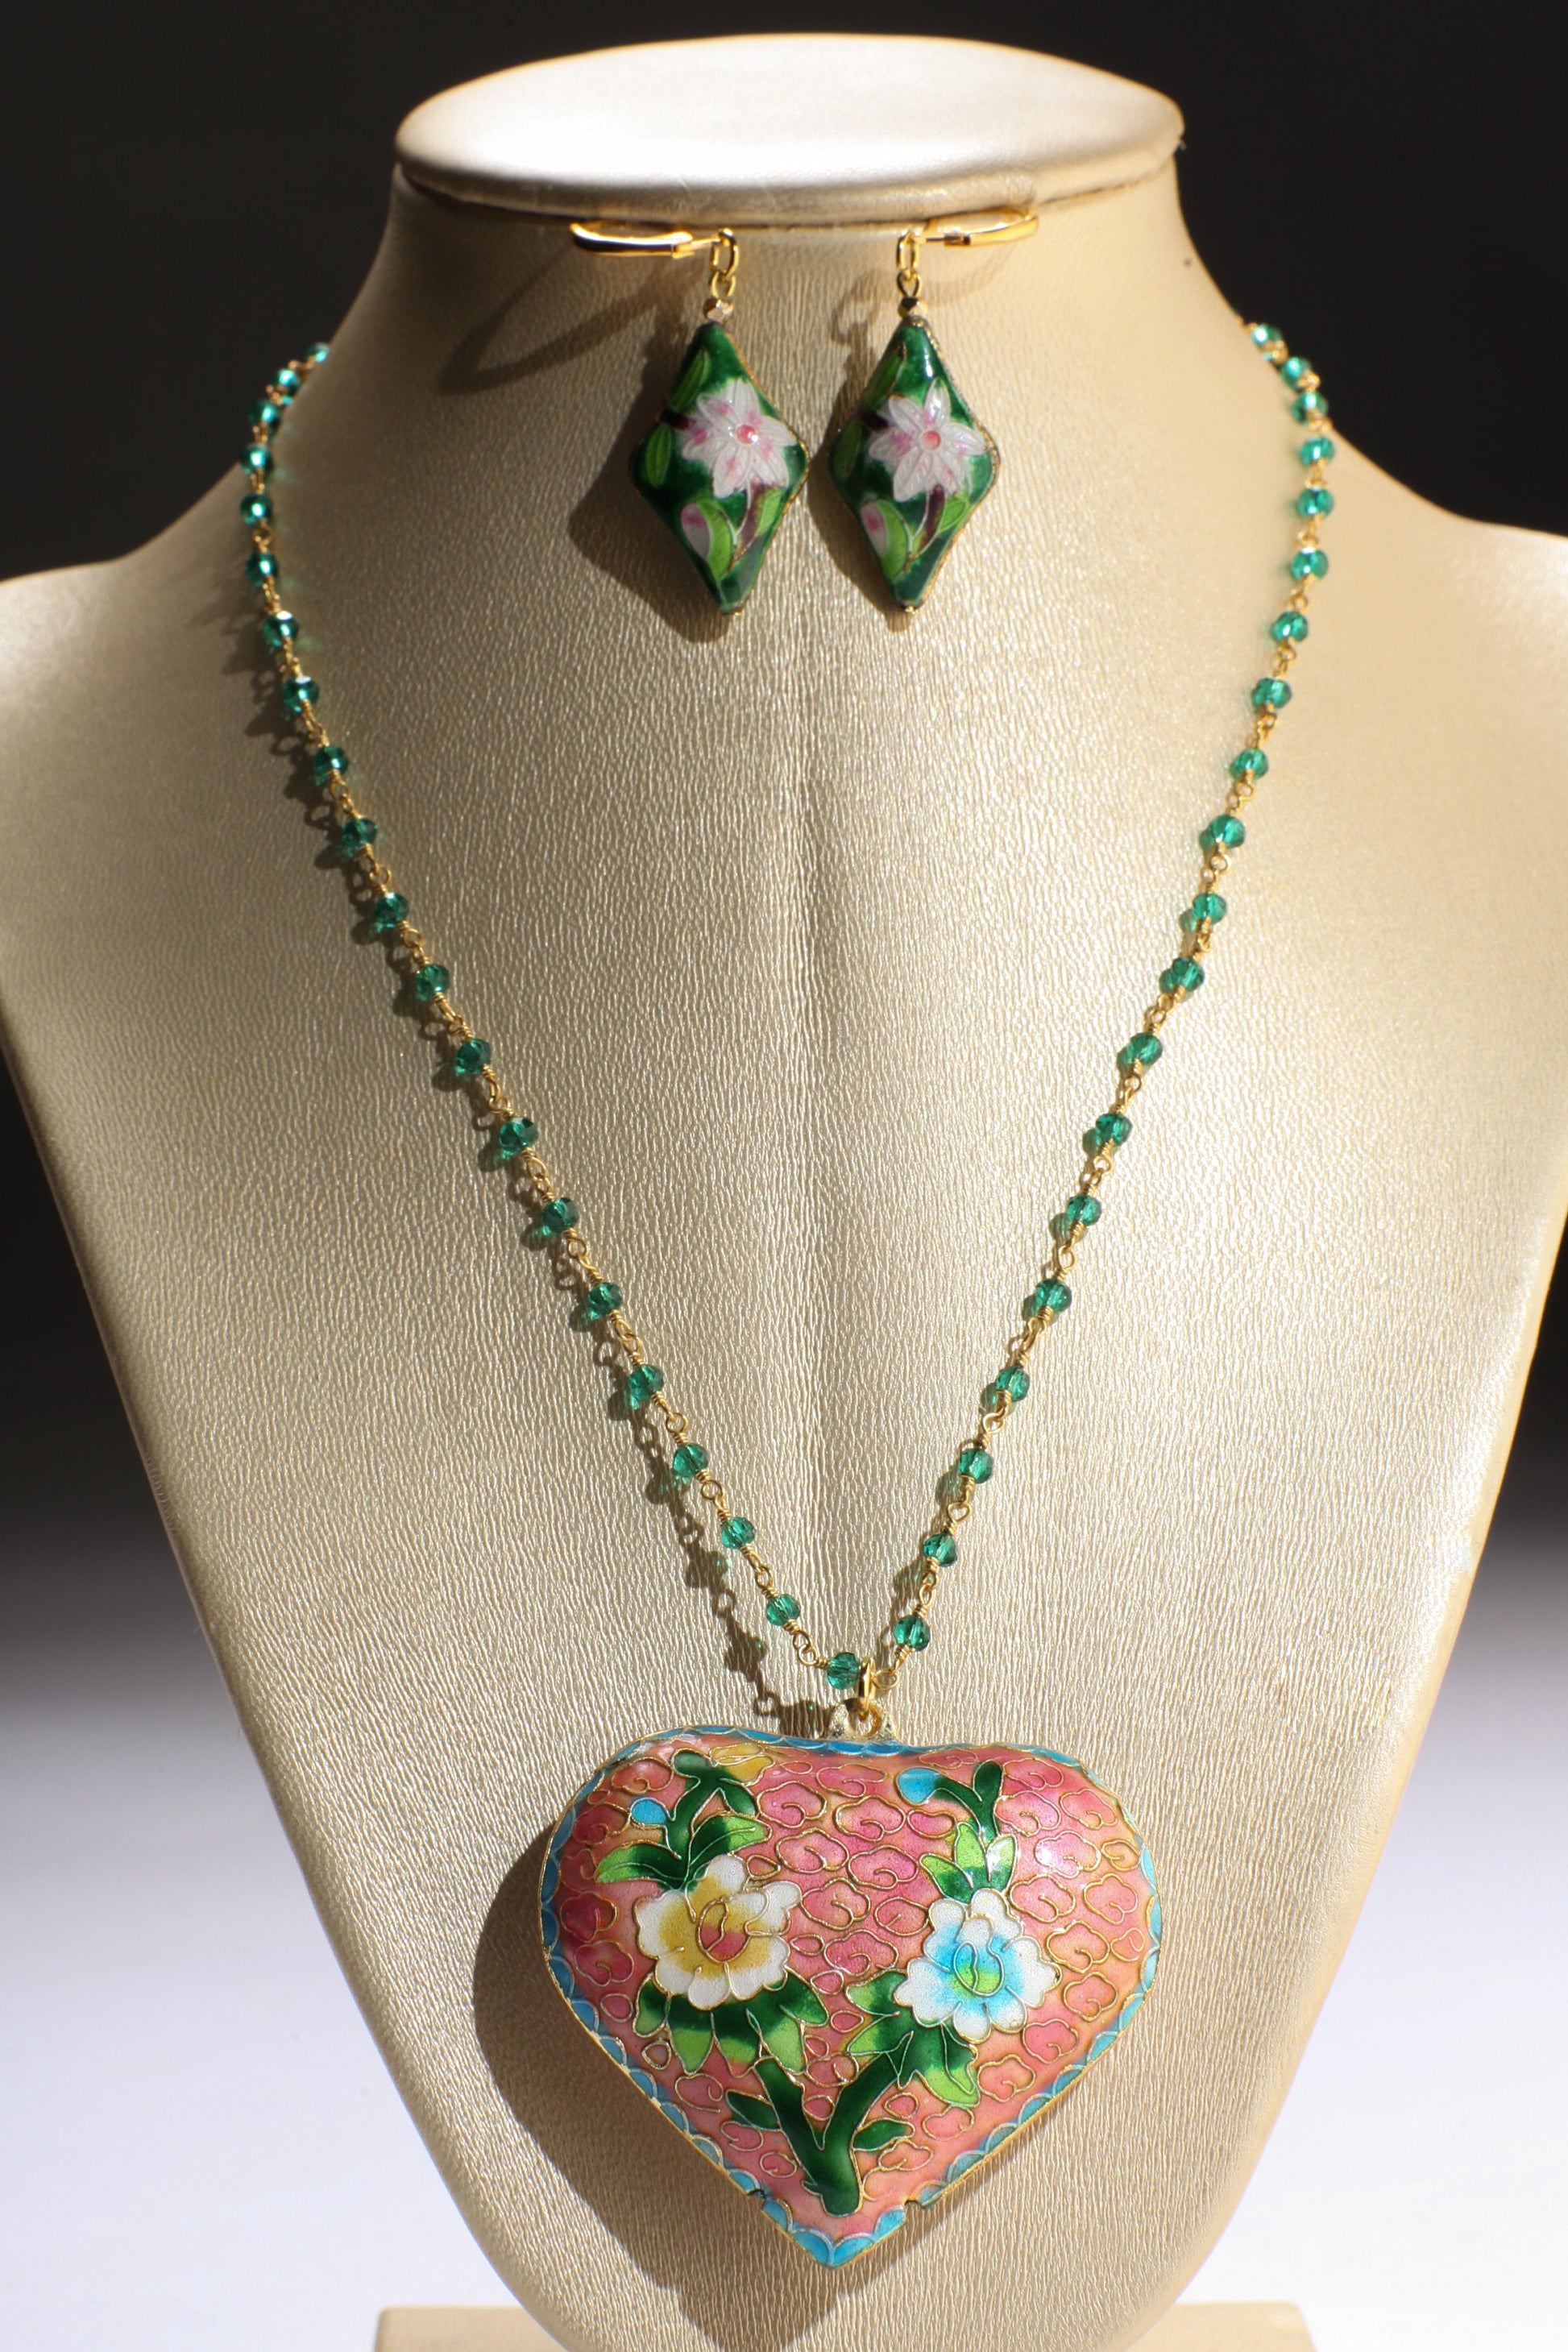 Traditional Cloisonné Pendant Vintage Floral Flowers Revisable Focal, Gold Plated Beaded Chain Necklace 20" matching Leverback Earrings set